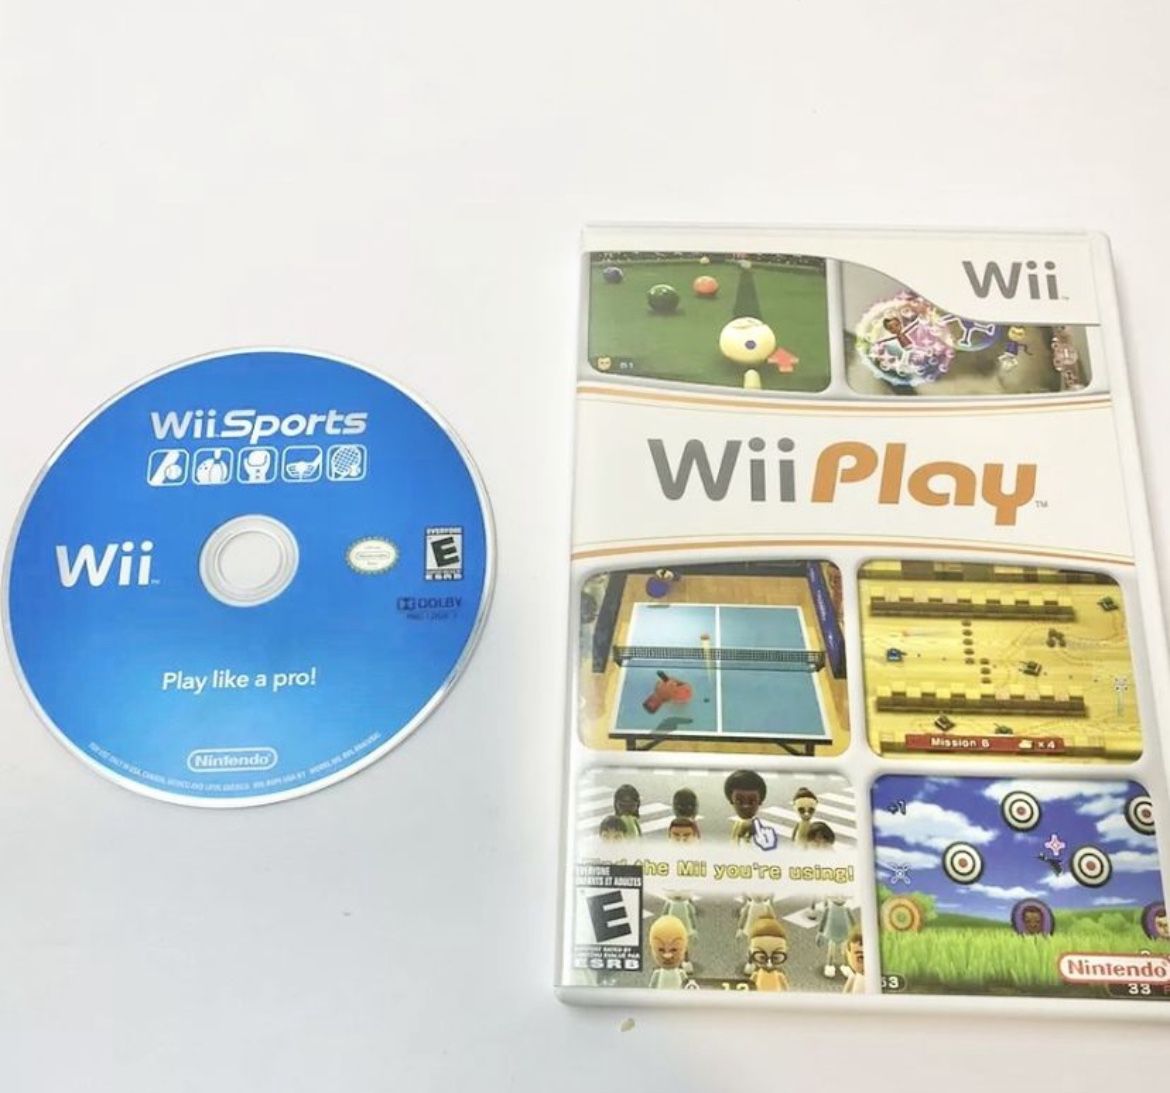 Wii Sports (Disc Only) & Wii Play CIB Complete Video Game Bundle lot of 2 $40 OBO